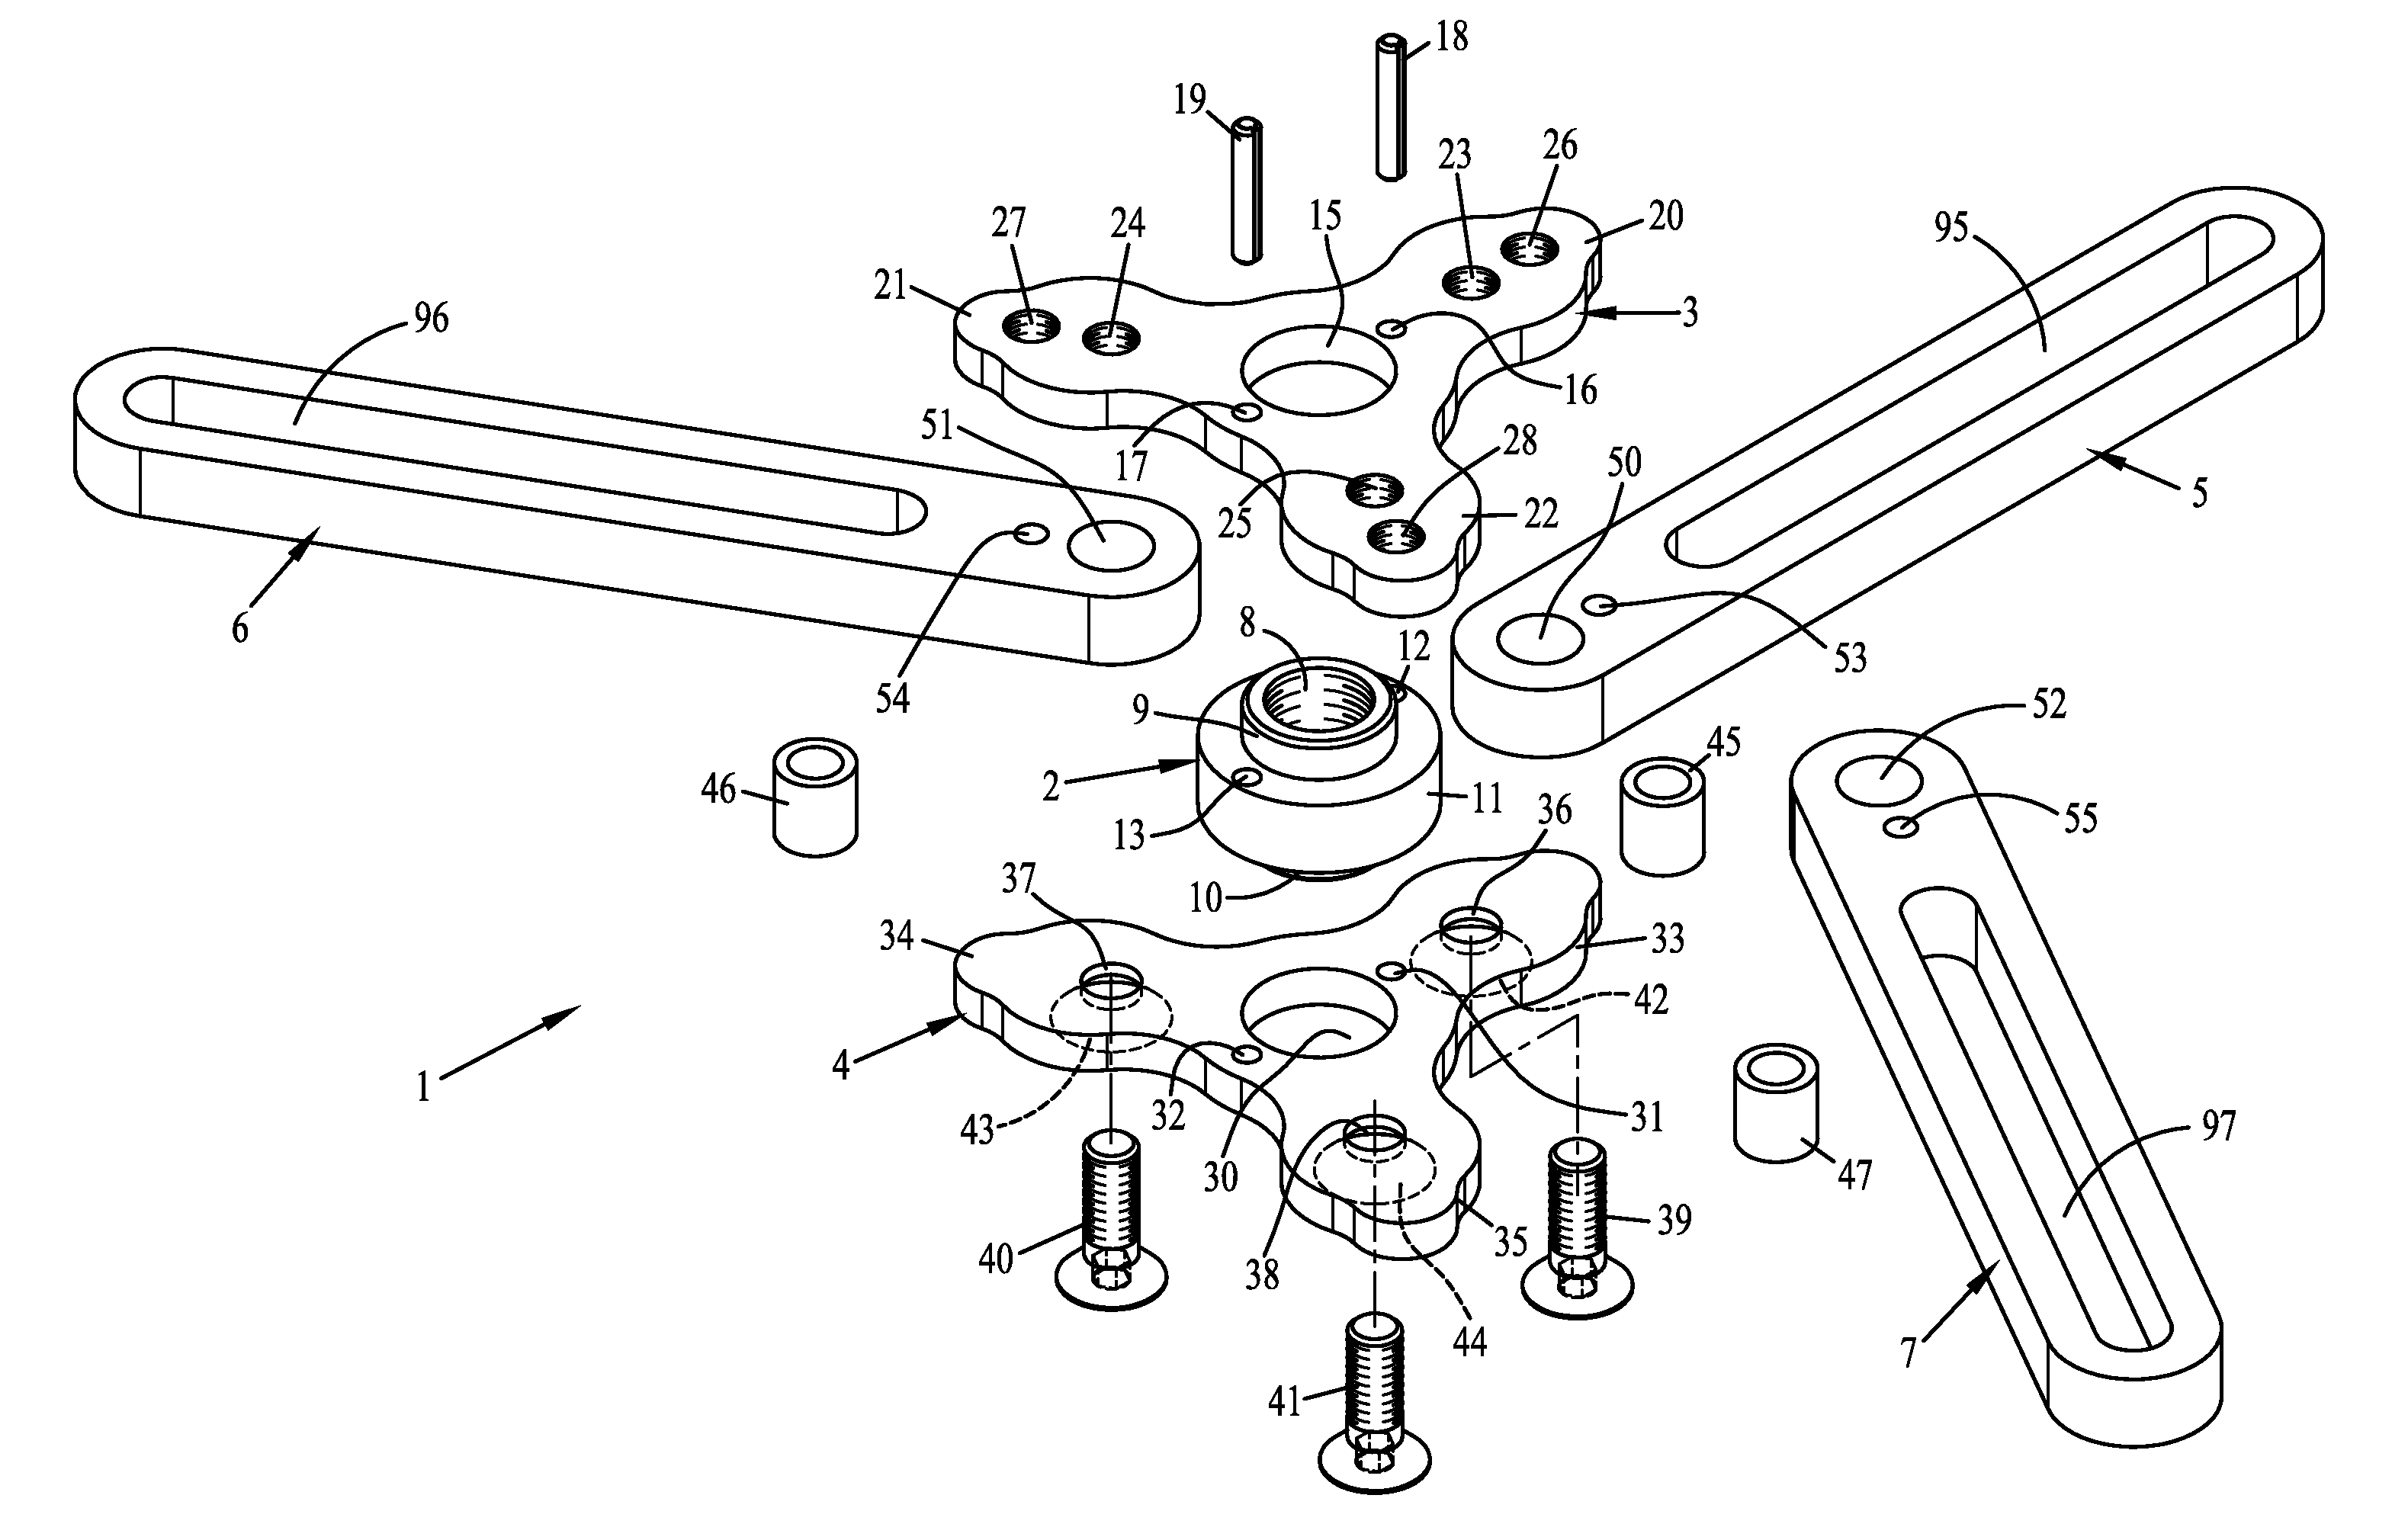 Device for pressing on a double clutch